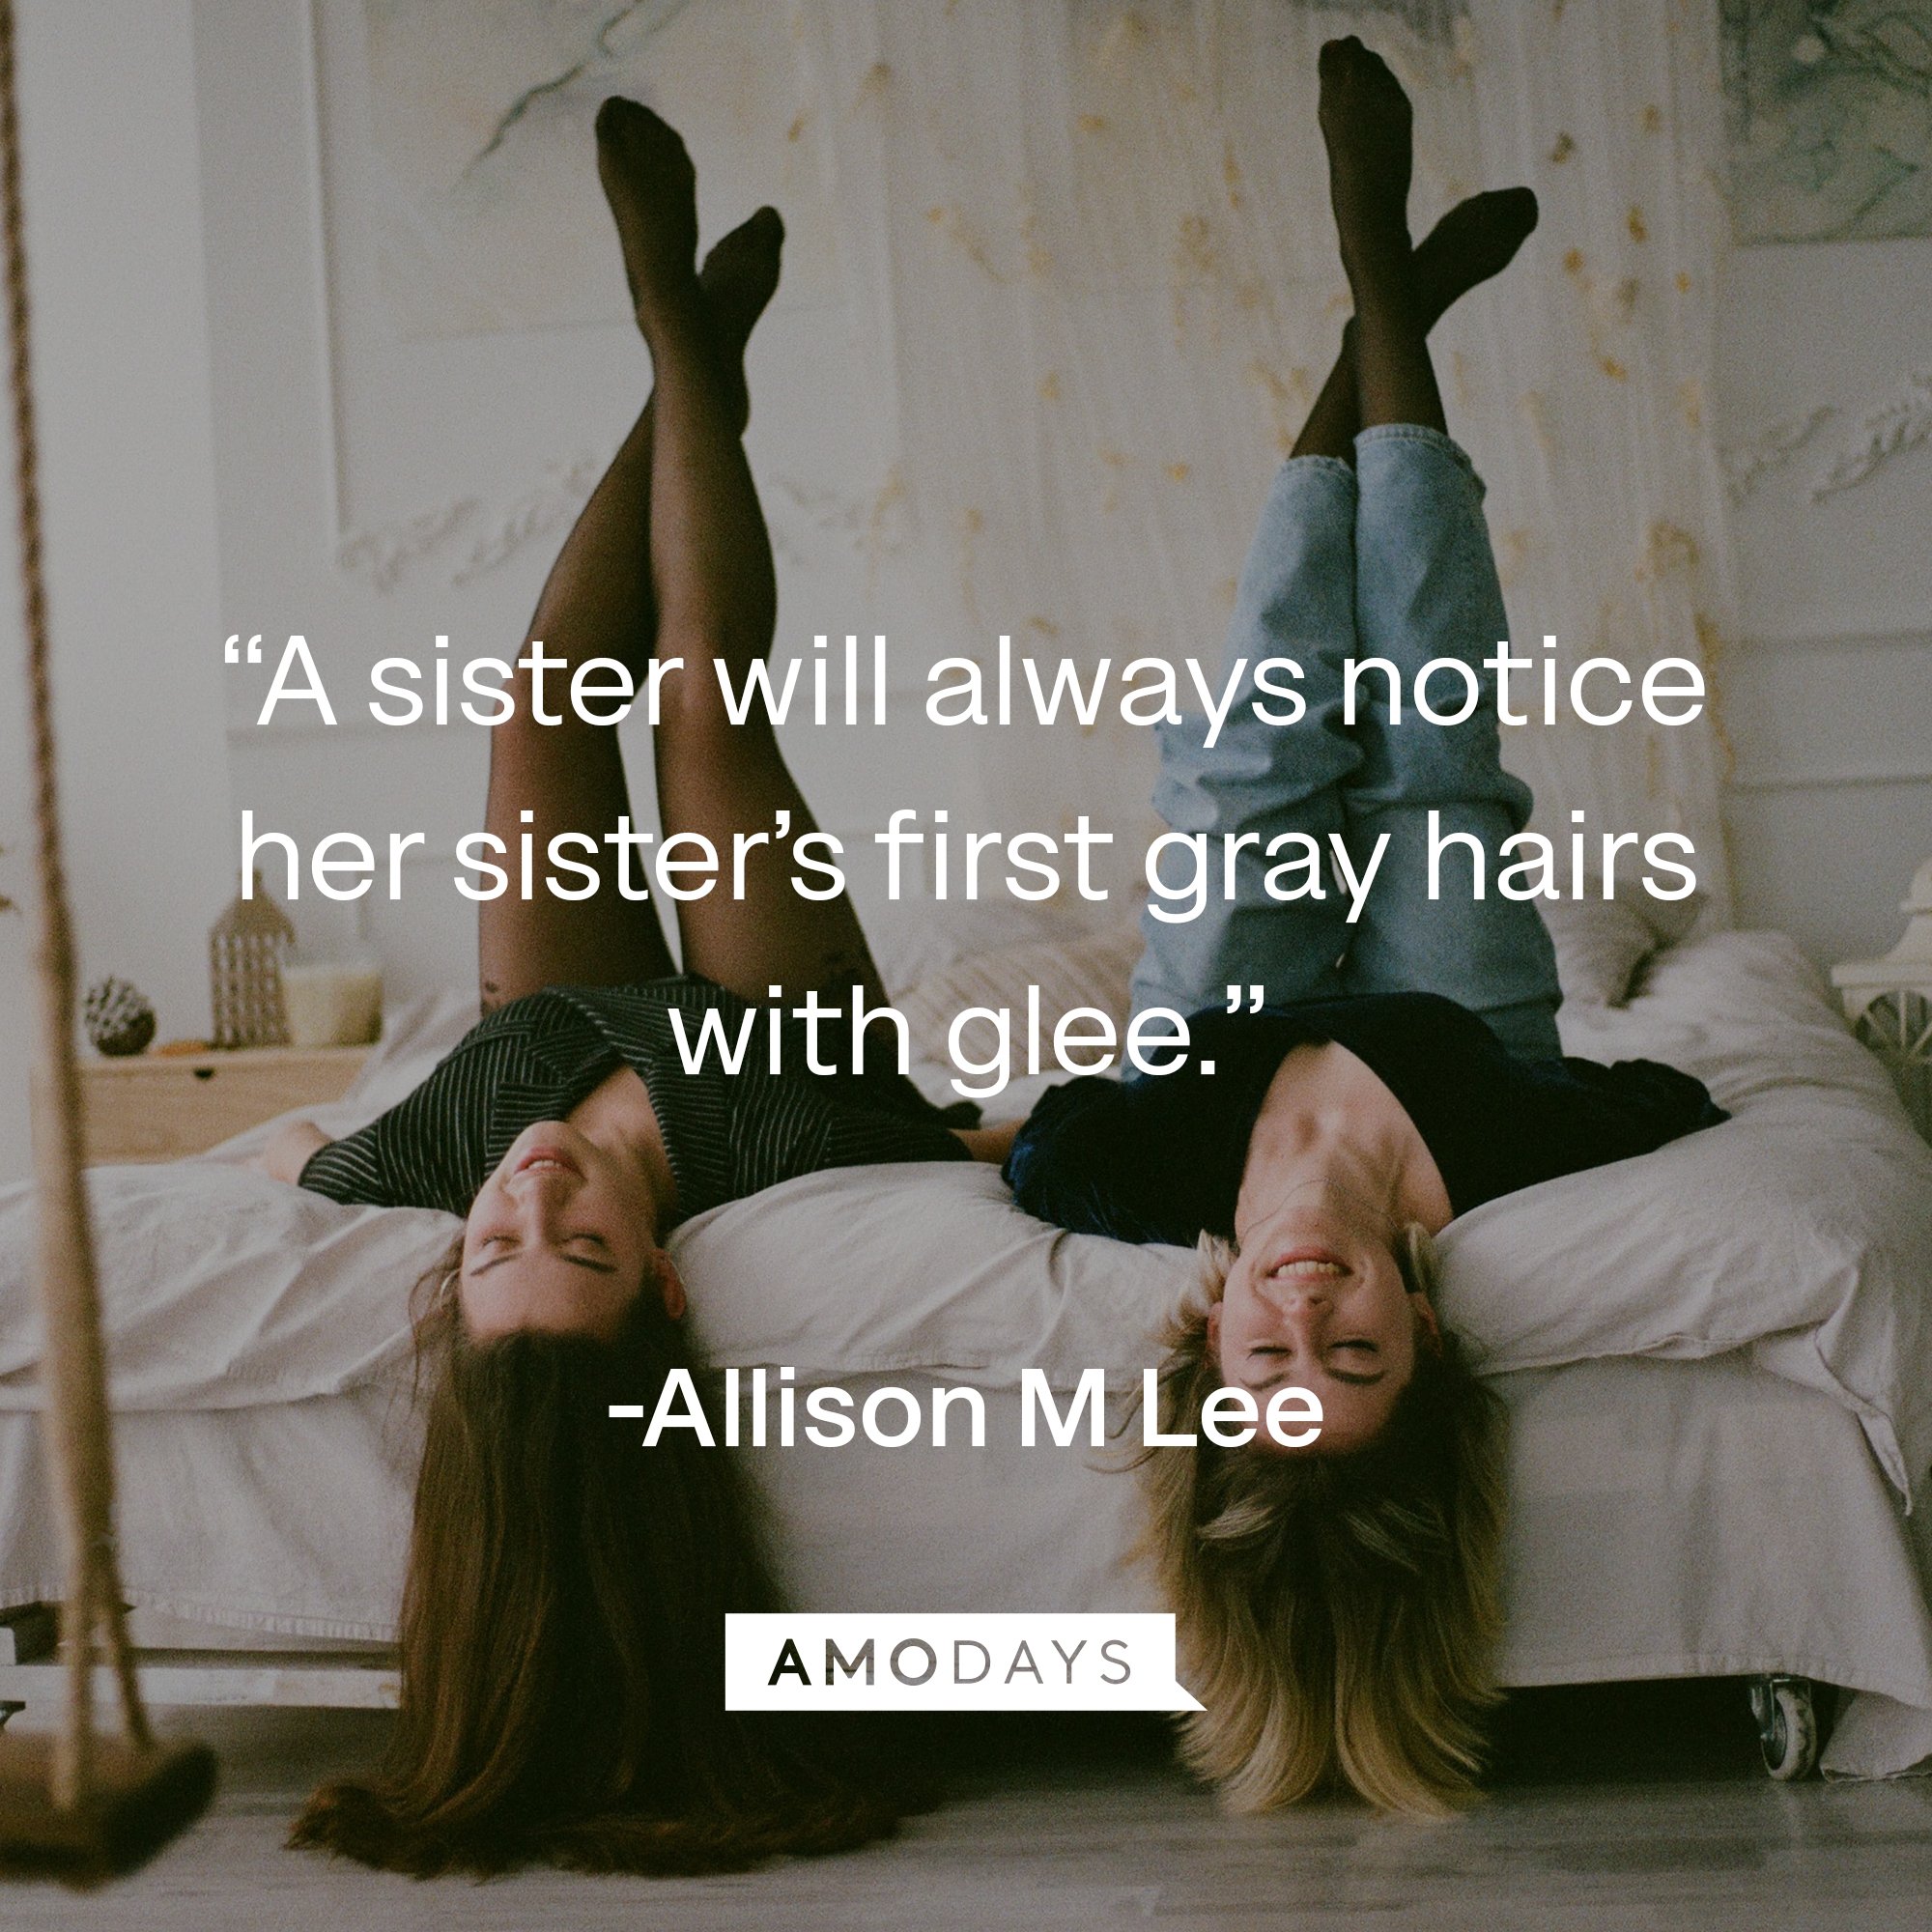 Allison M Lee's quote: “A sister will always notice her sister’s first gray hairs with glee.” | Image: AmoDays